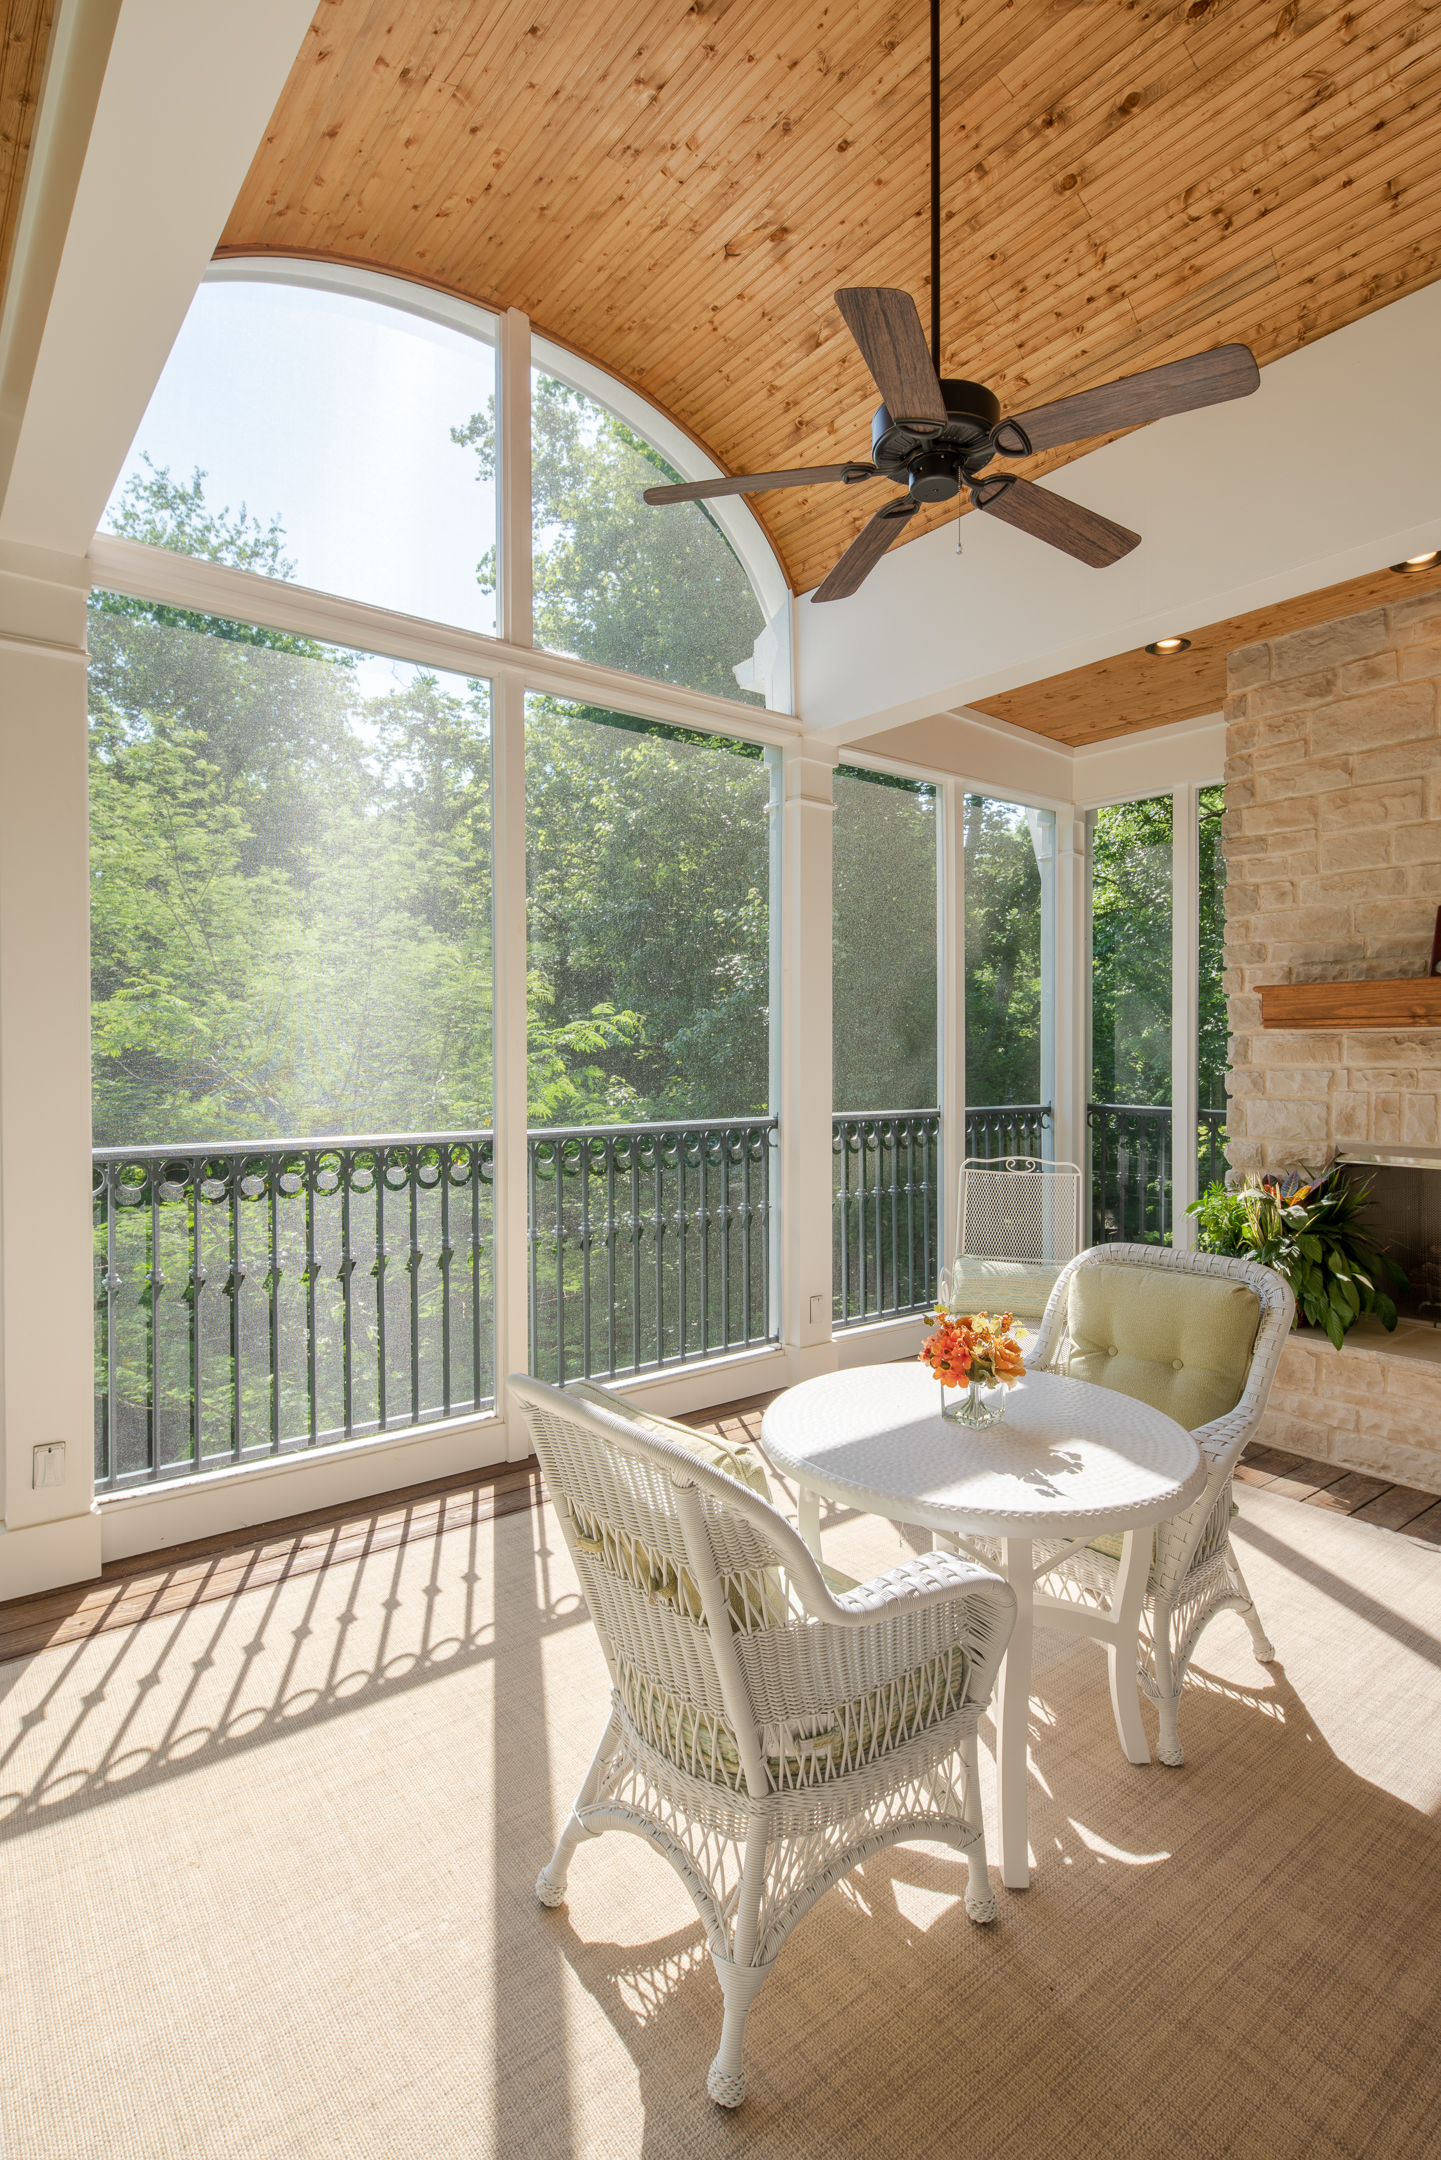 Vaulted barrel beadboard screened porch ceiling